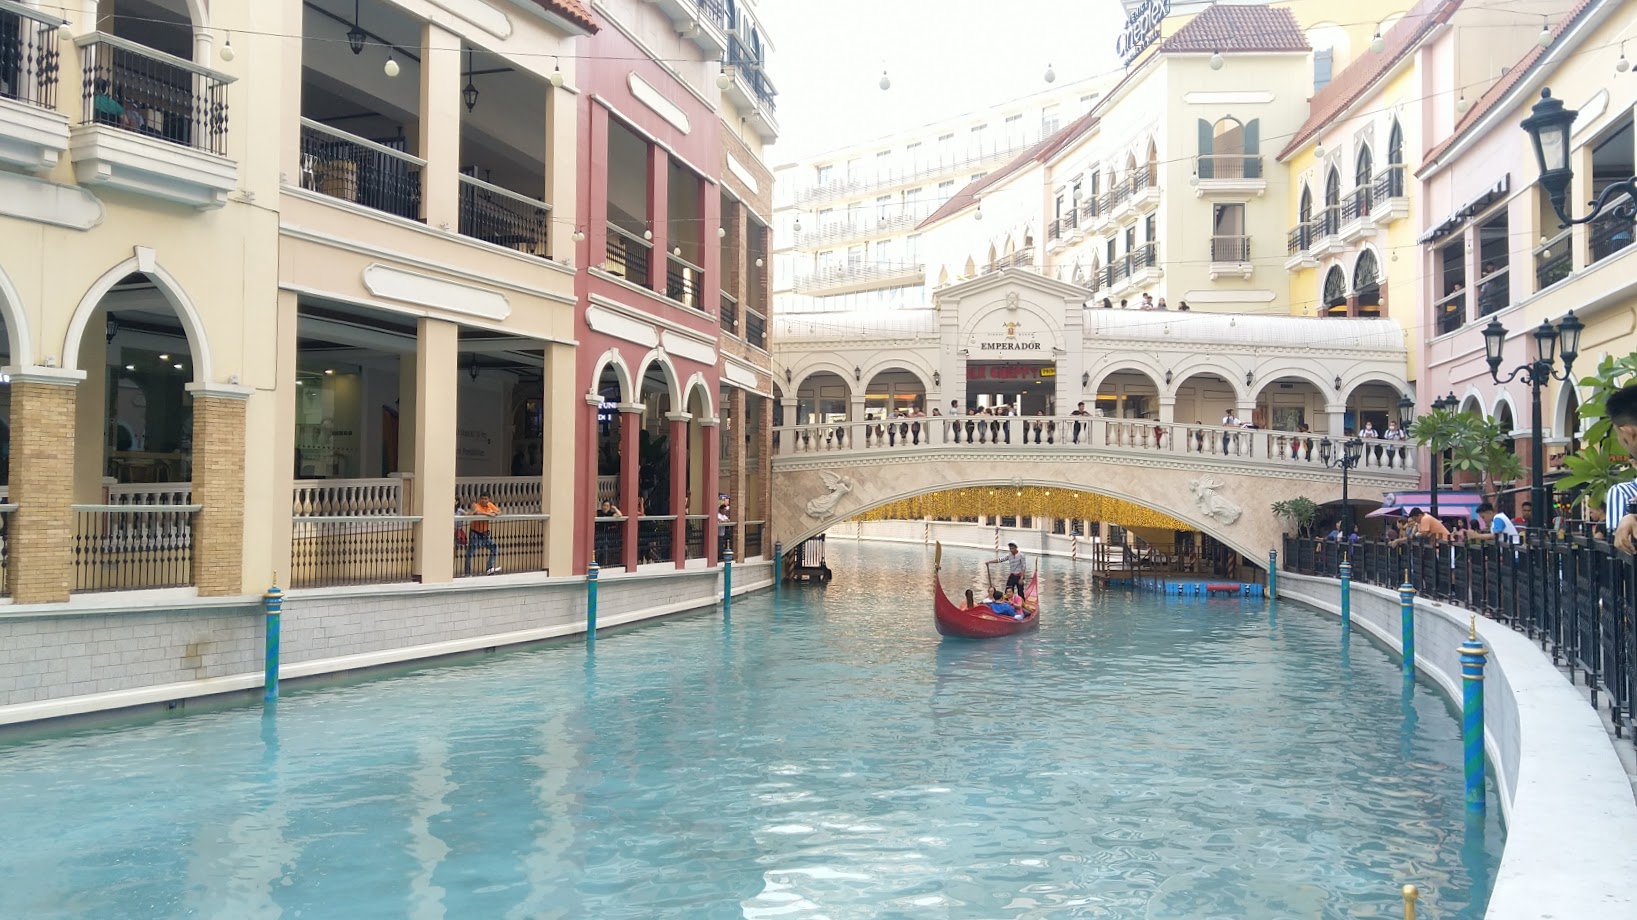 Venice Grand Canal Mall in Taguig